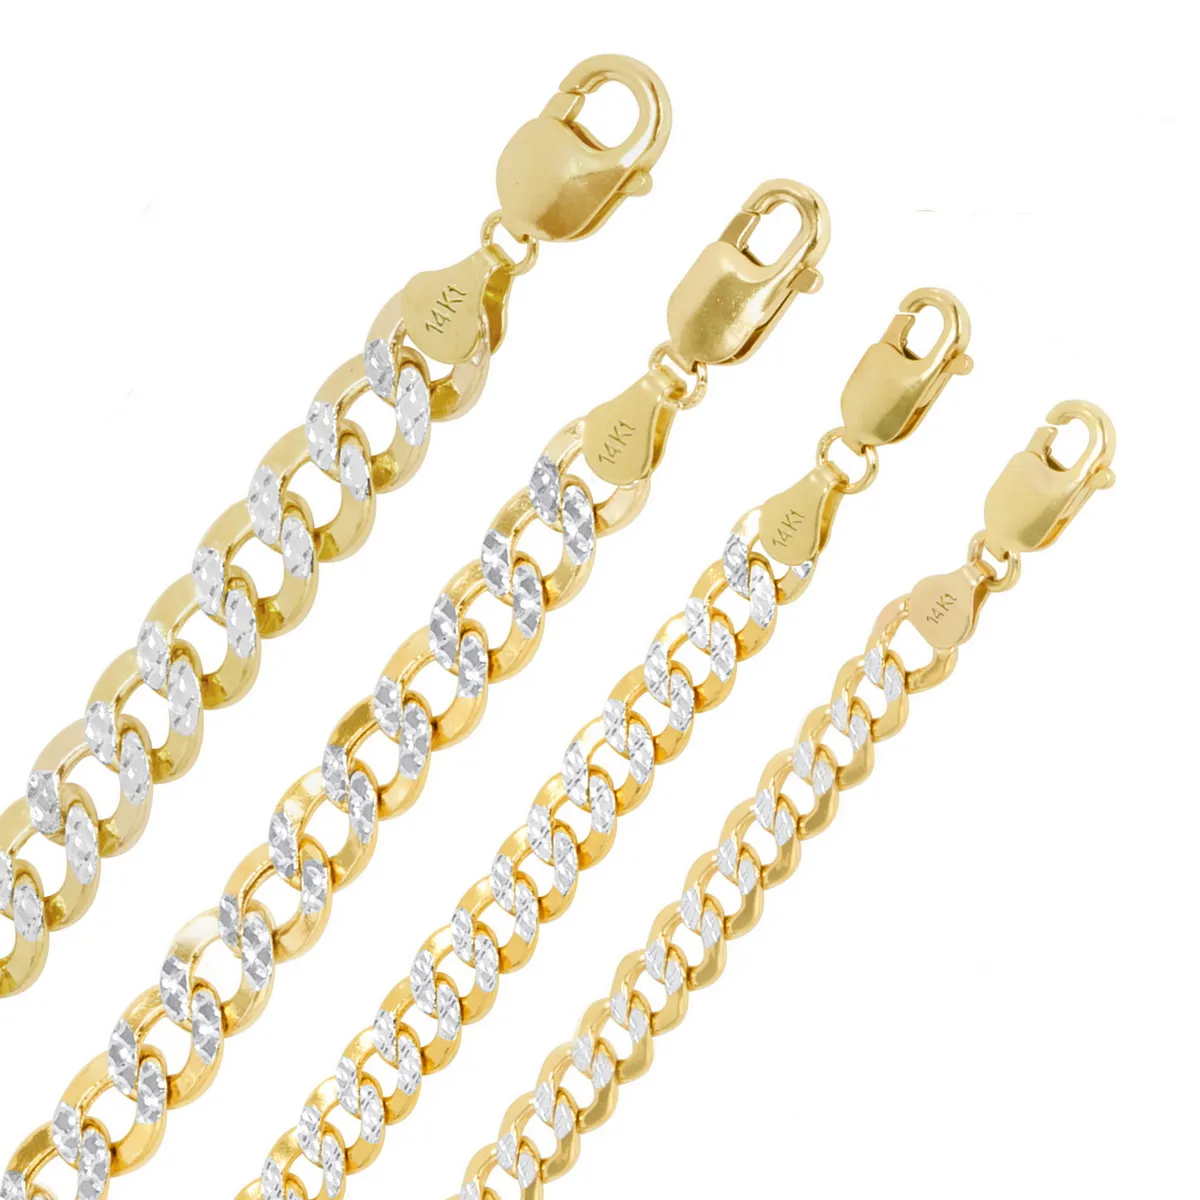 14K Real Solid Yellow Gold Necklace Rope Chain 7mm 24 inch 14kt Chain Unisex